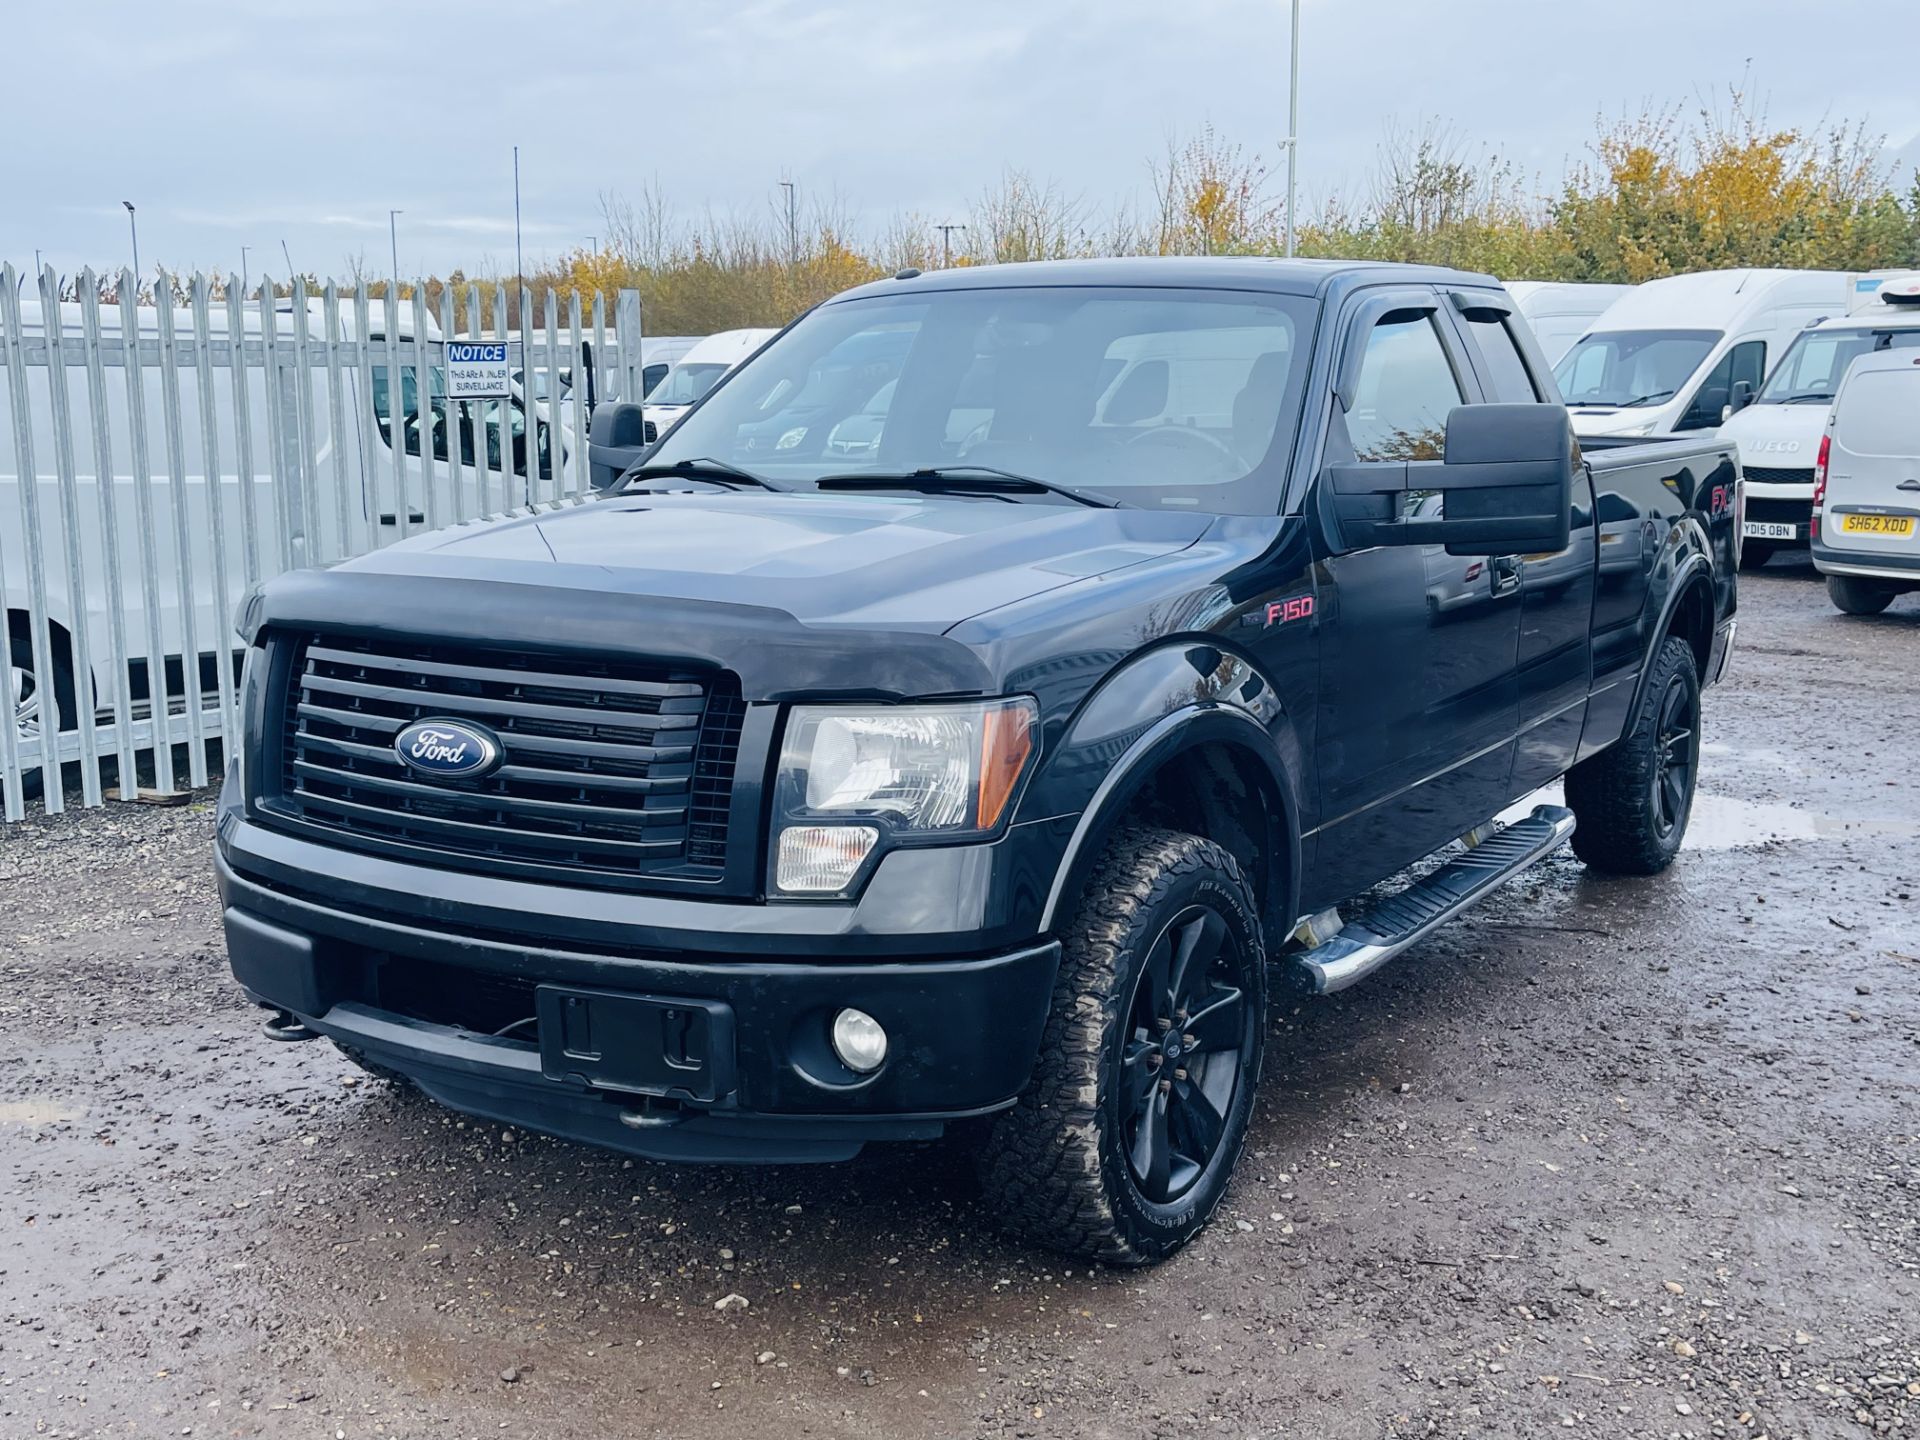 ** ON SALE ** Ford F-150 3.5L V6 SuperCab 4WD FX4 Edition '2012 Year' Colour Coded Package - FX4 - Image 3 of 32